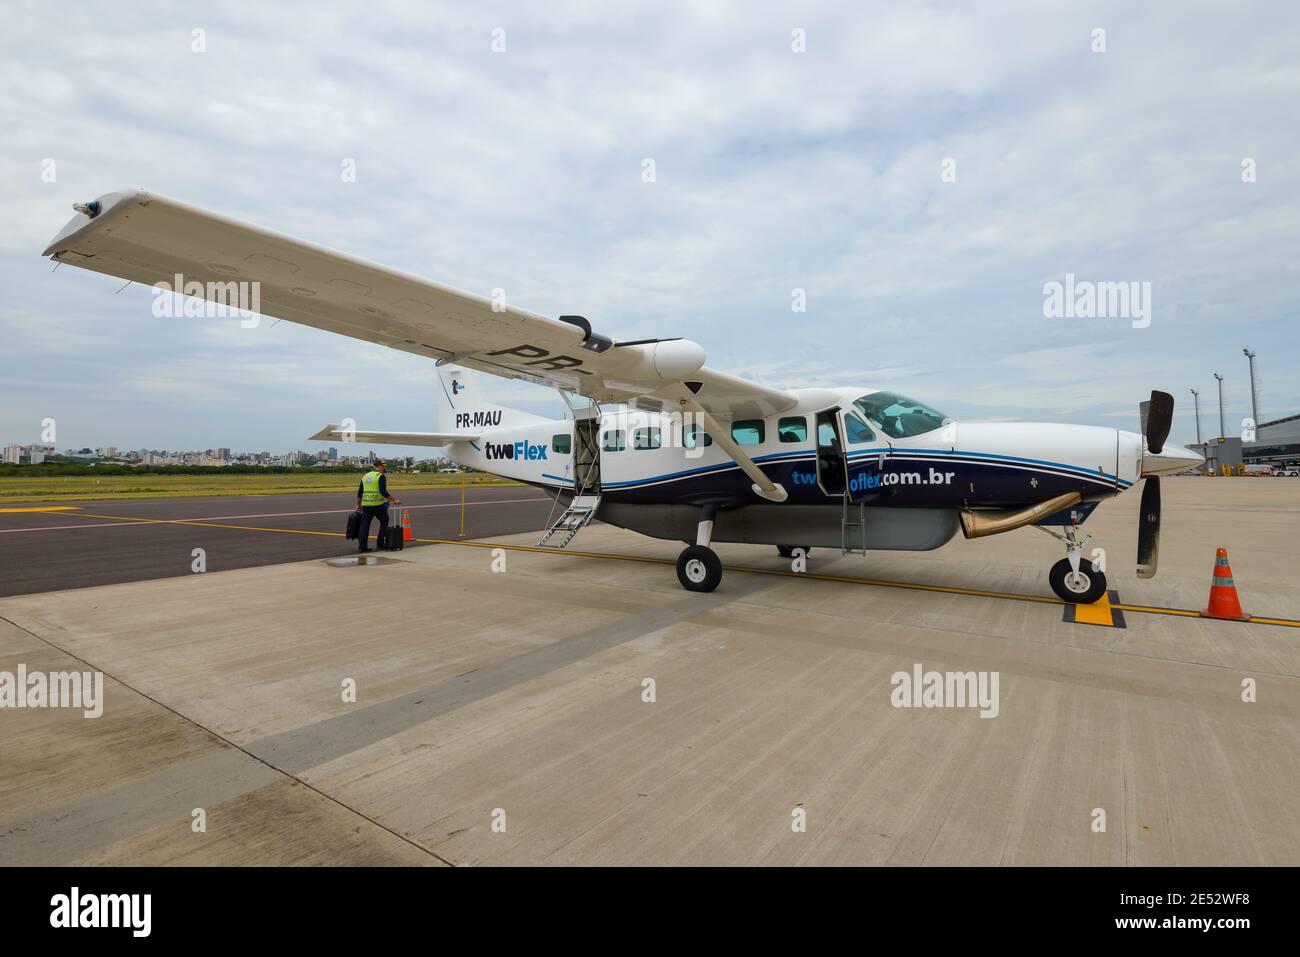 Twoflex Airline operated by Azul Conecta Cessna 208B Grand Caravan propeller aircraft used for regional flights. Small plane of Two Flex Airways. Stock Photo